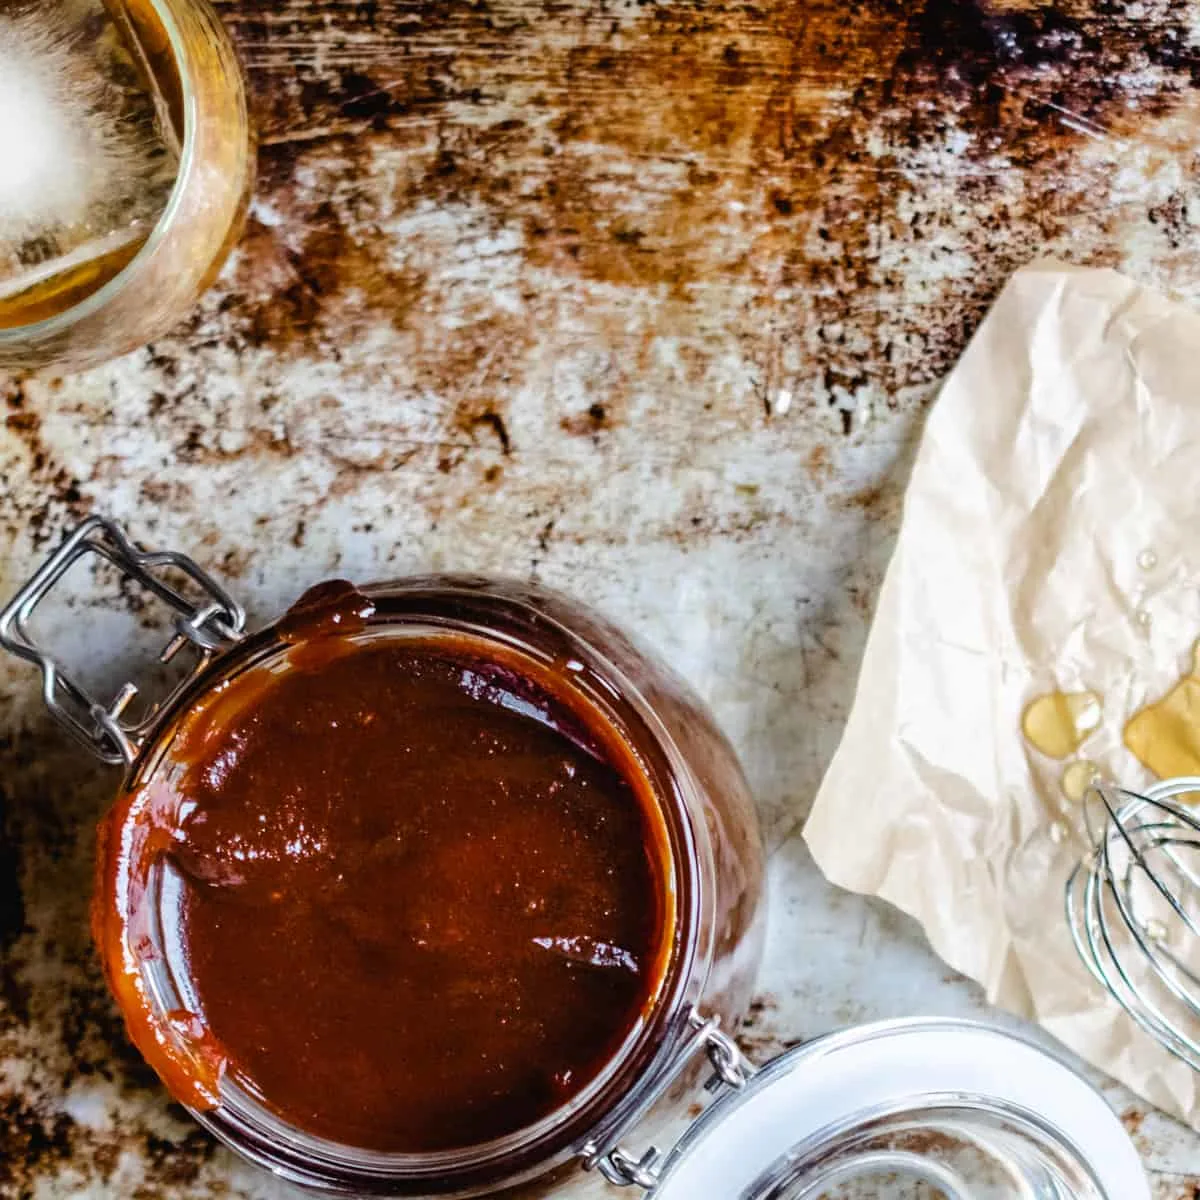 A jar of barbecue sauce next to a whisk with honey on it and glass of bourbon with ice.